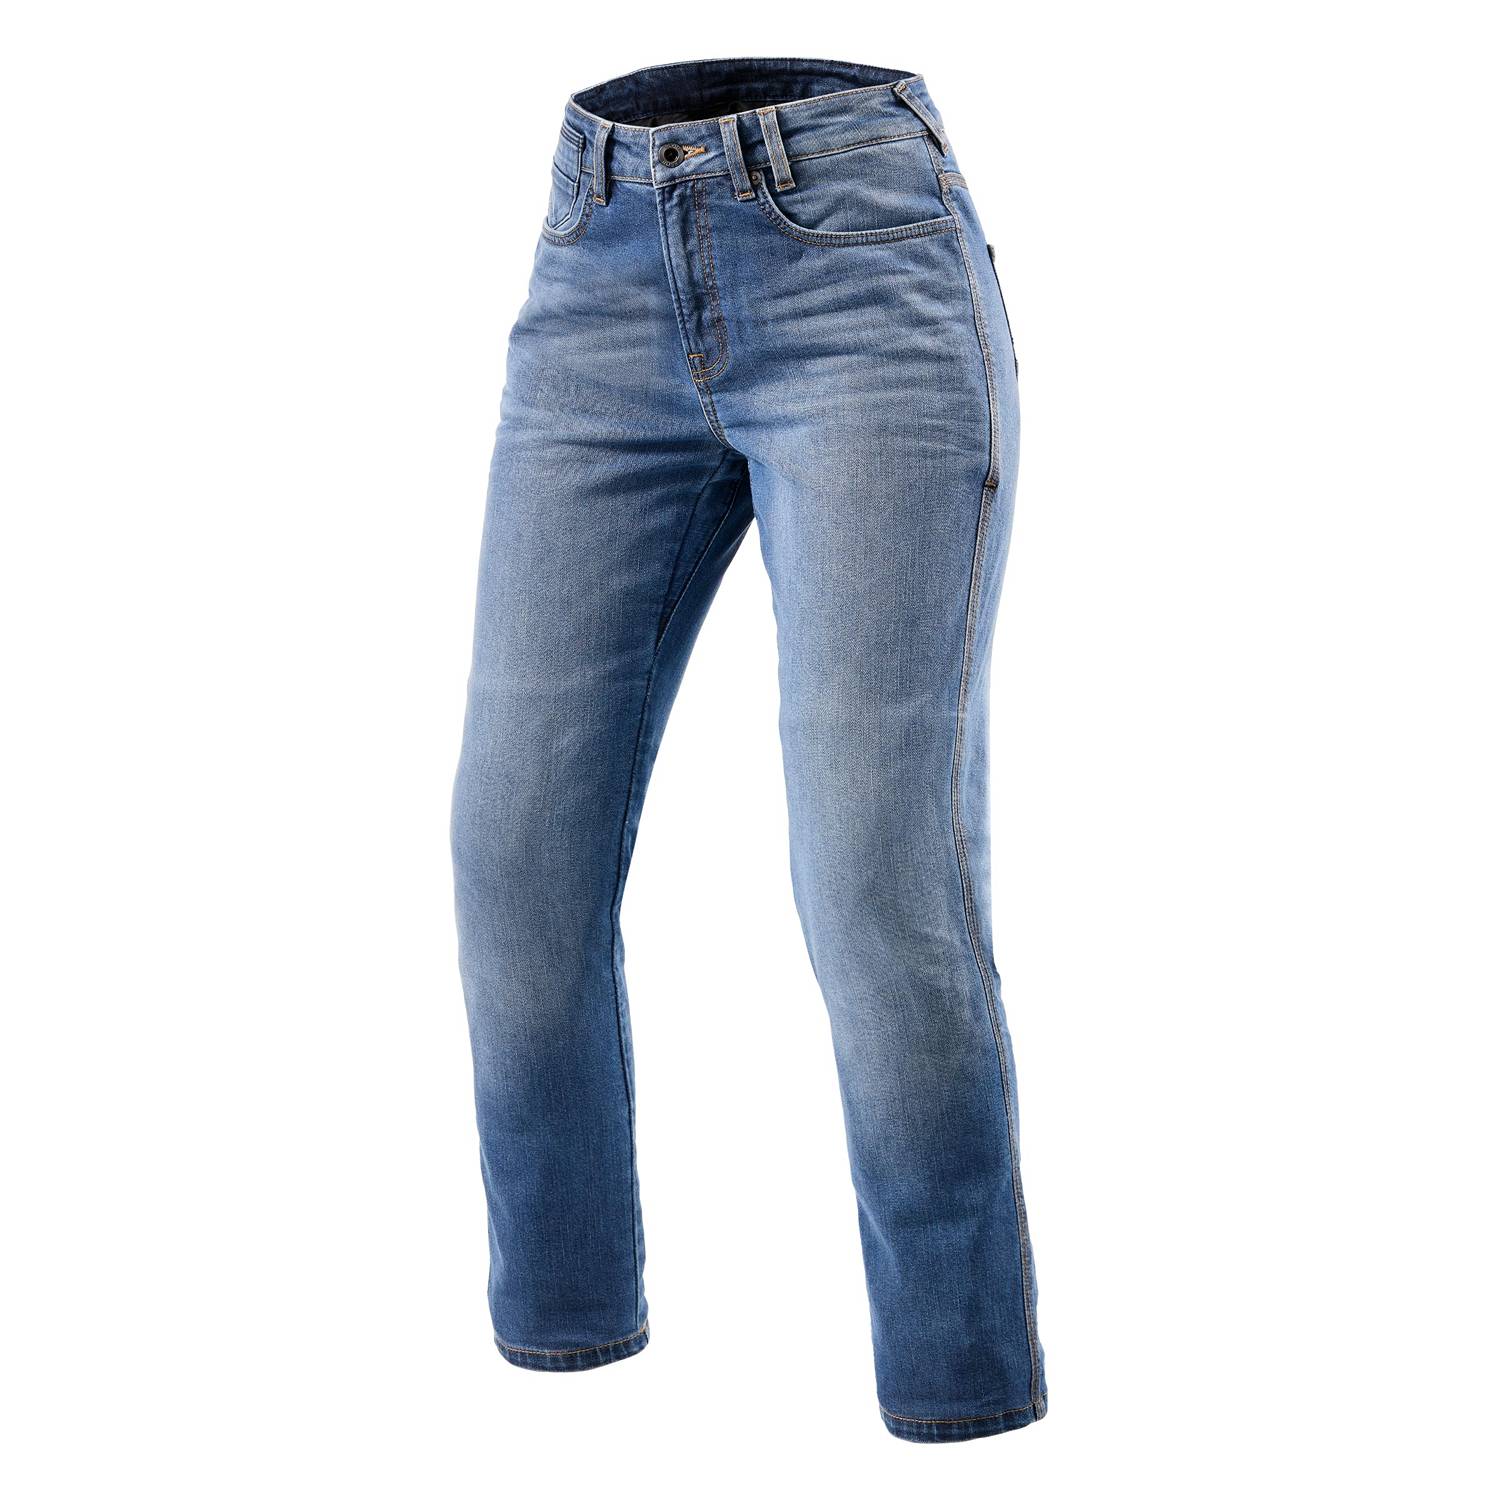 Image of REV'IT! Jeans Victoria 2 Ladies SF Classic Blue Used Motorcycle Jeans Size L32/W31 ID 8700001342858